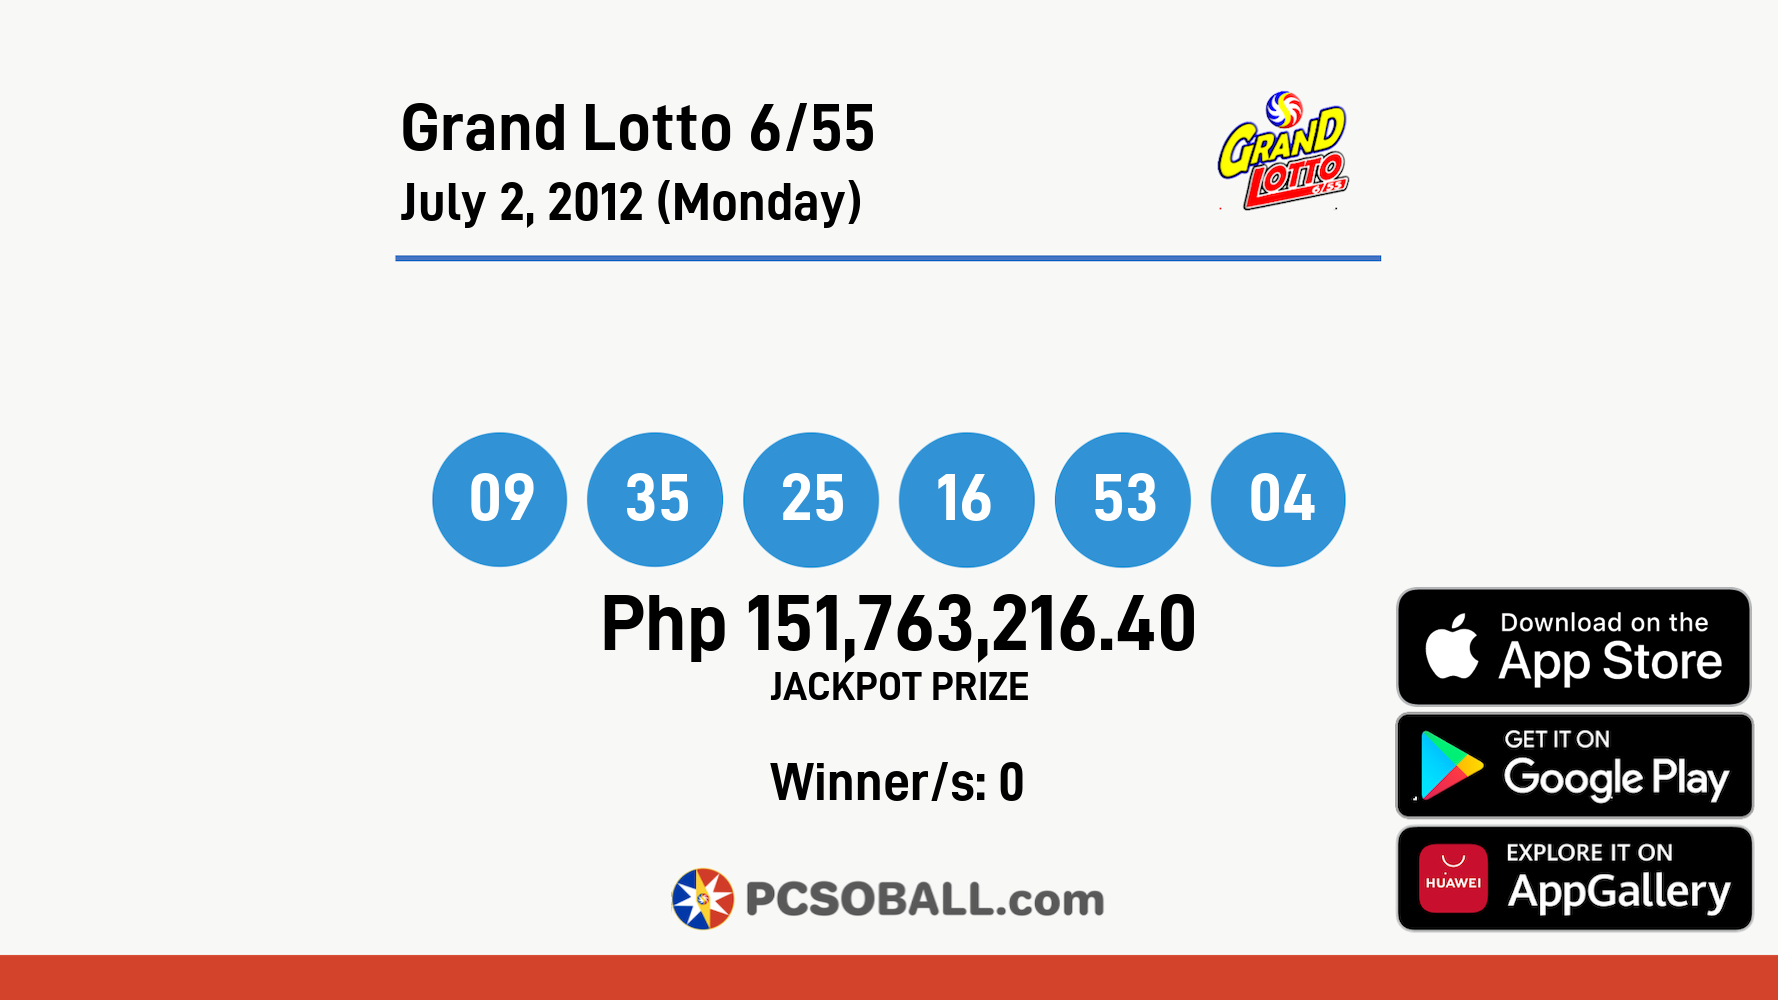 Grand Lotto 6/55 July 2, 2012 (Monday) Result